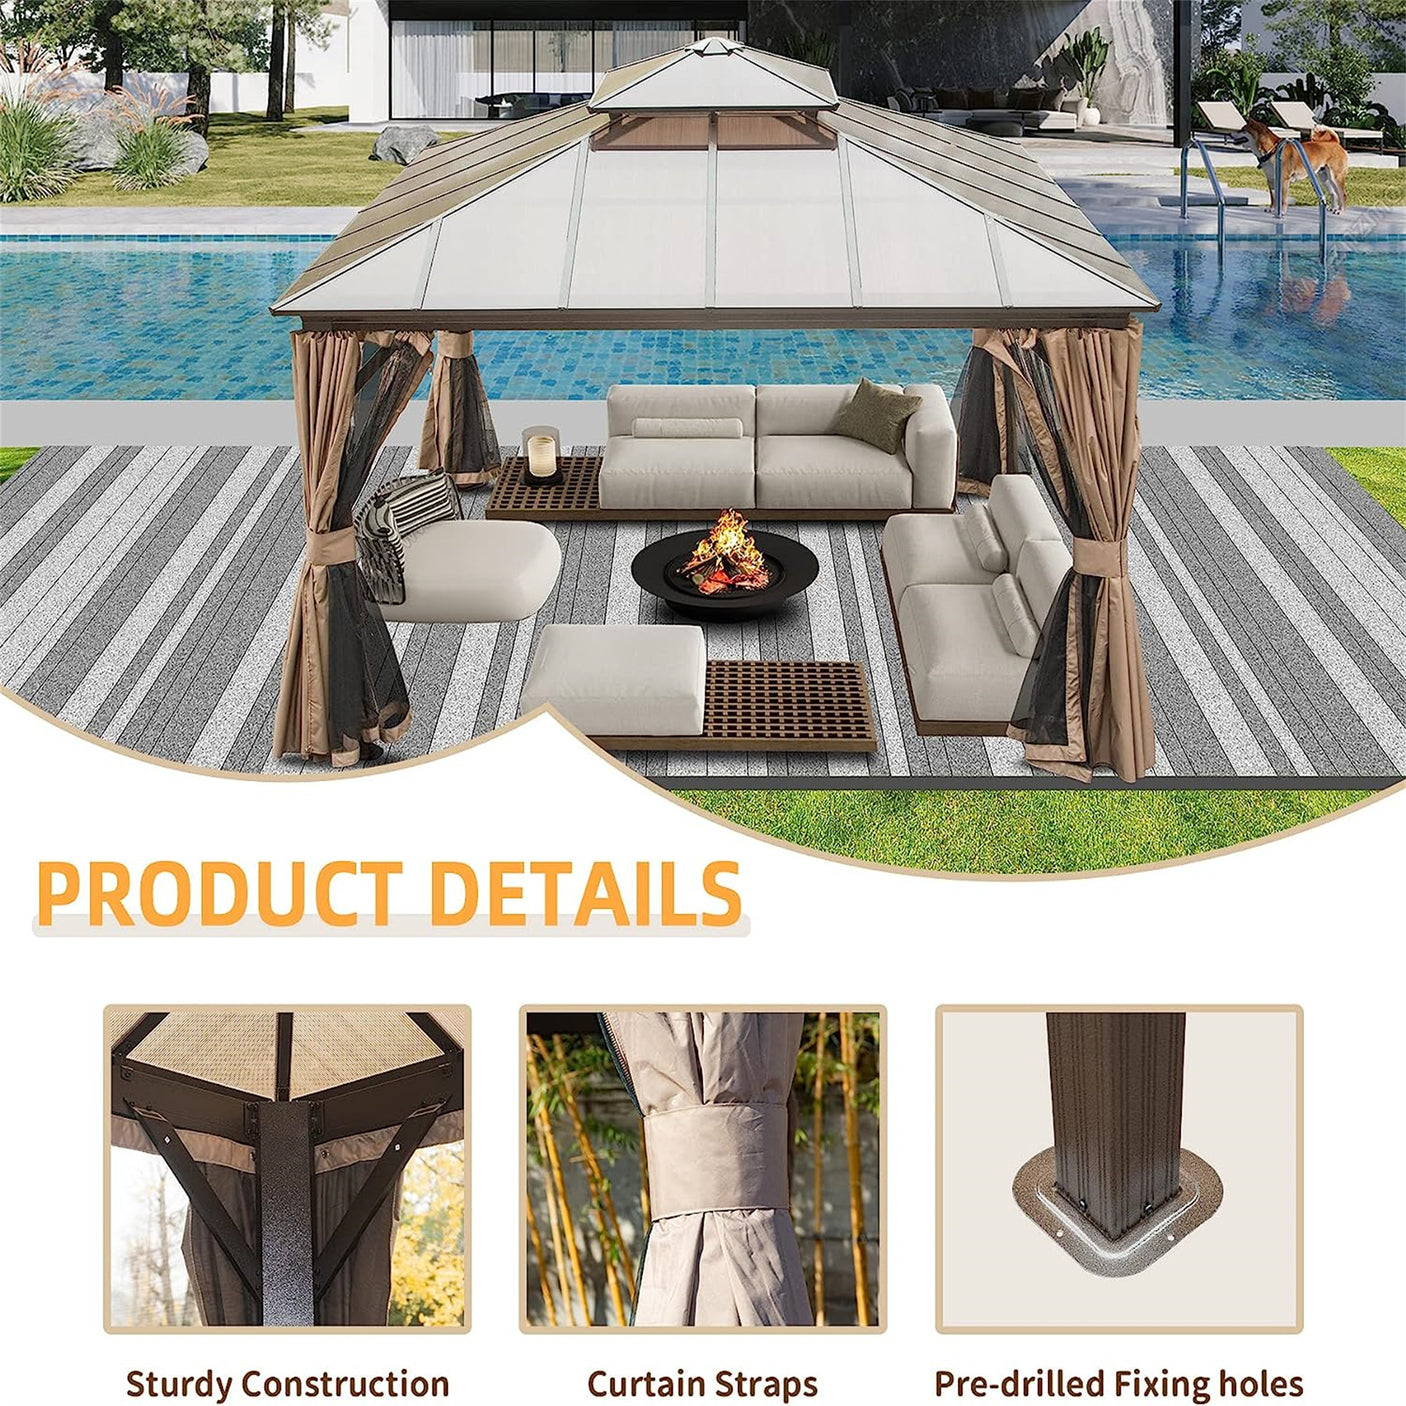 12'x12' Hardtop Gazebo, Permanent Outdoor Gazebo with Polycarbonate Double Roof, Aluminum Gazebo Pavilion with Curtain and Net for Garden, Patio, Lawns, Deck, Backyard(Brown)